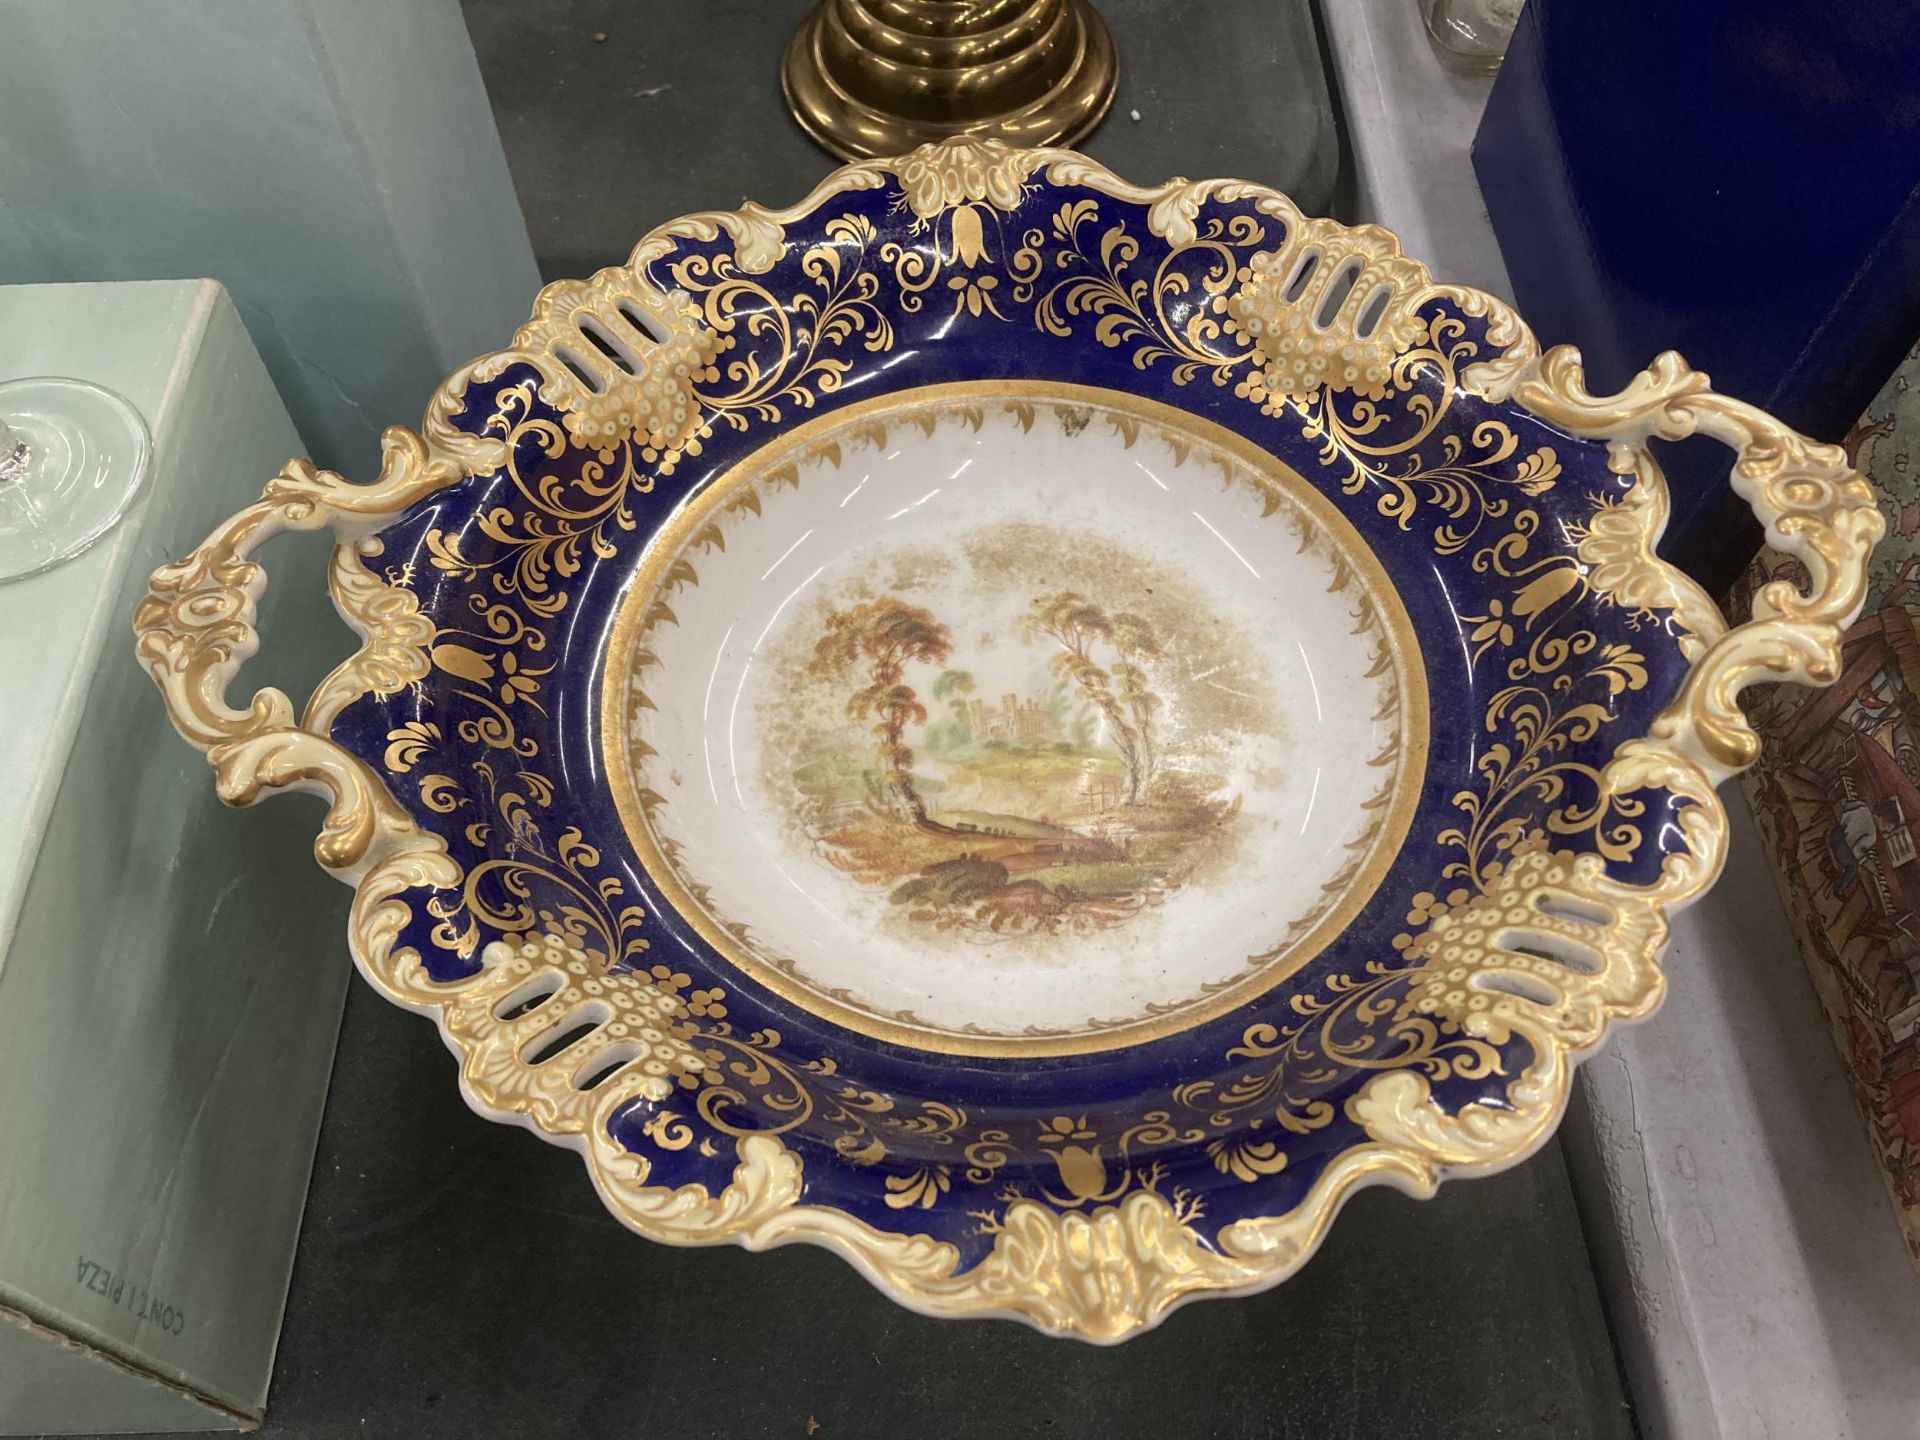 A VICTORIAN FOOTED COMPORT WITH COBALT BLUE, GOLD FILIGREE AND TRANSFER PRINTED SCENE HEIGHT 17CM - Image 2 of 4